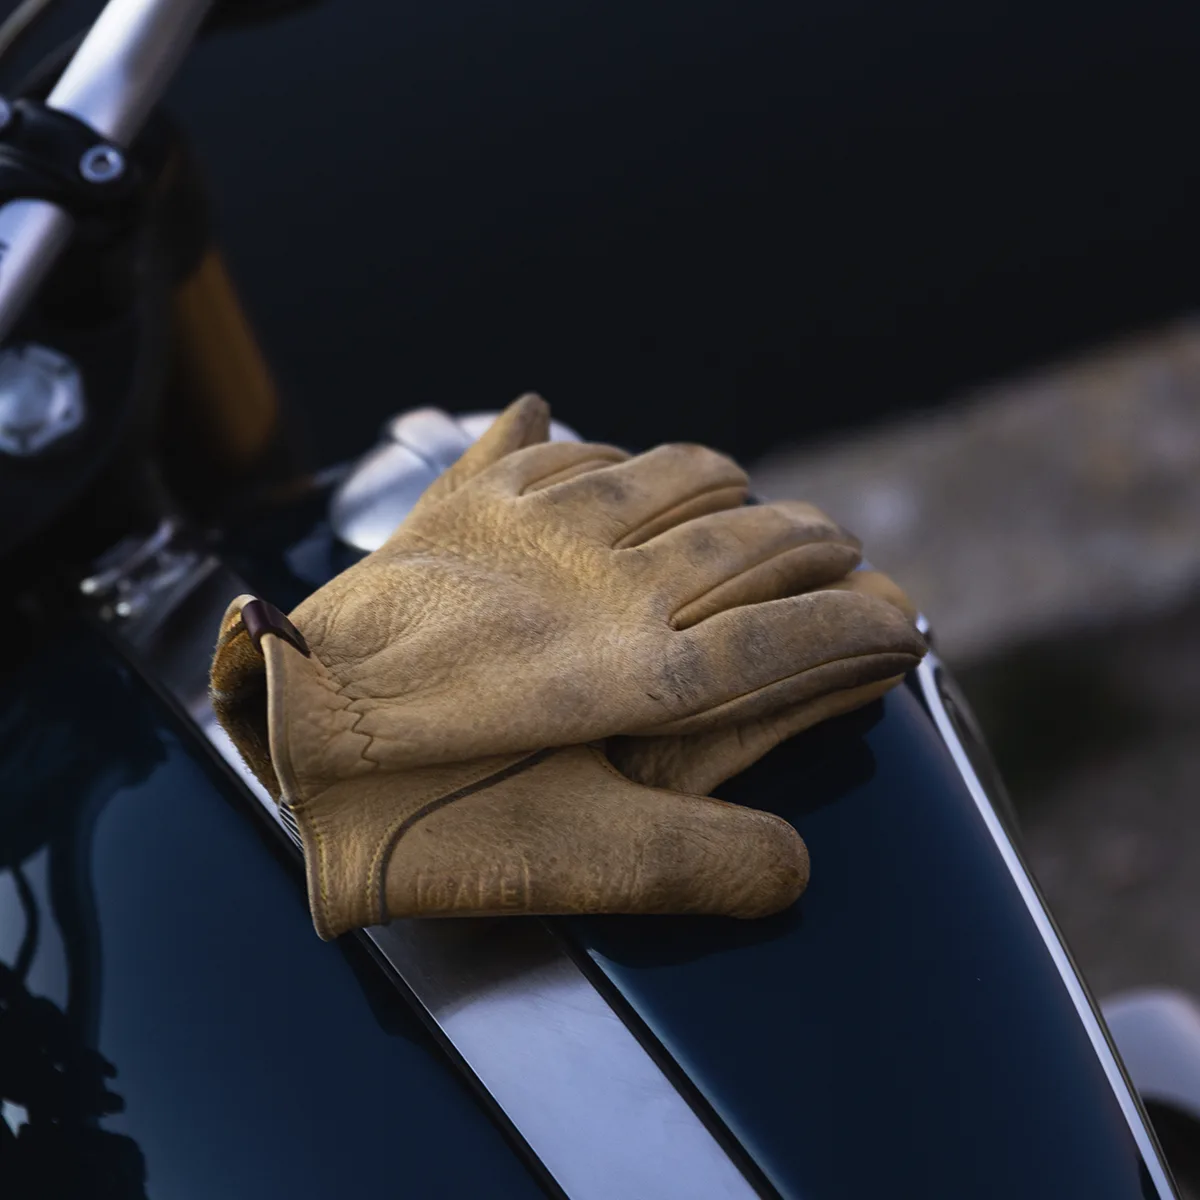 MADE IN THE USA LIGHT BROWN DEERSKIN LEATHER MOTORCYCLE GAUNTLET GLOVES 